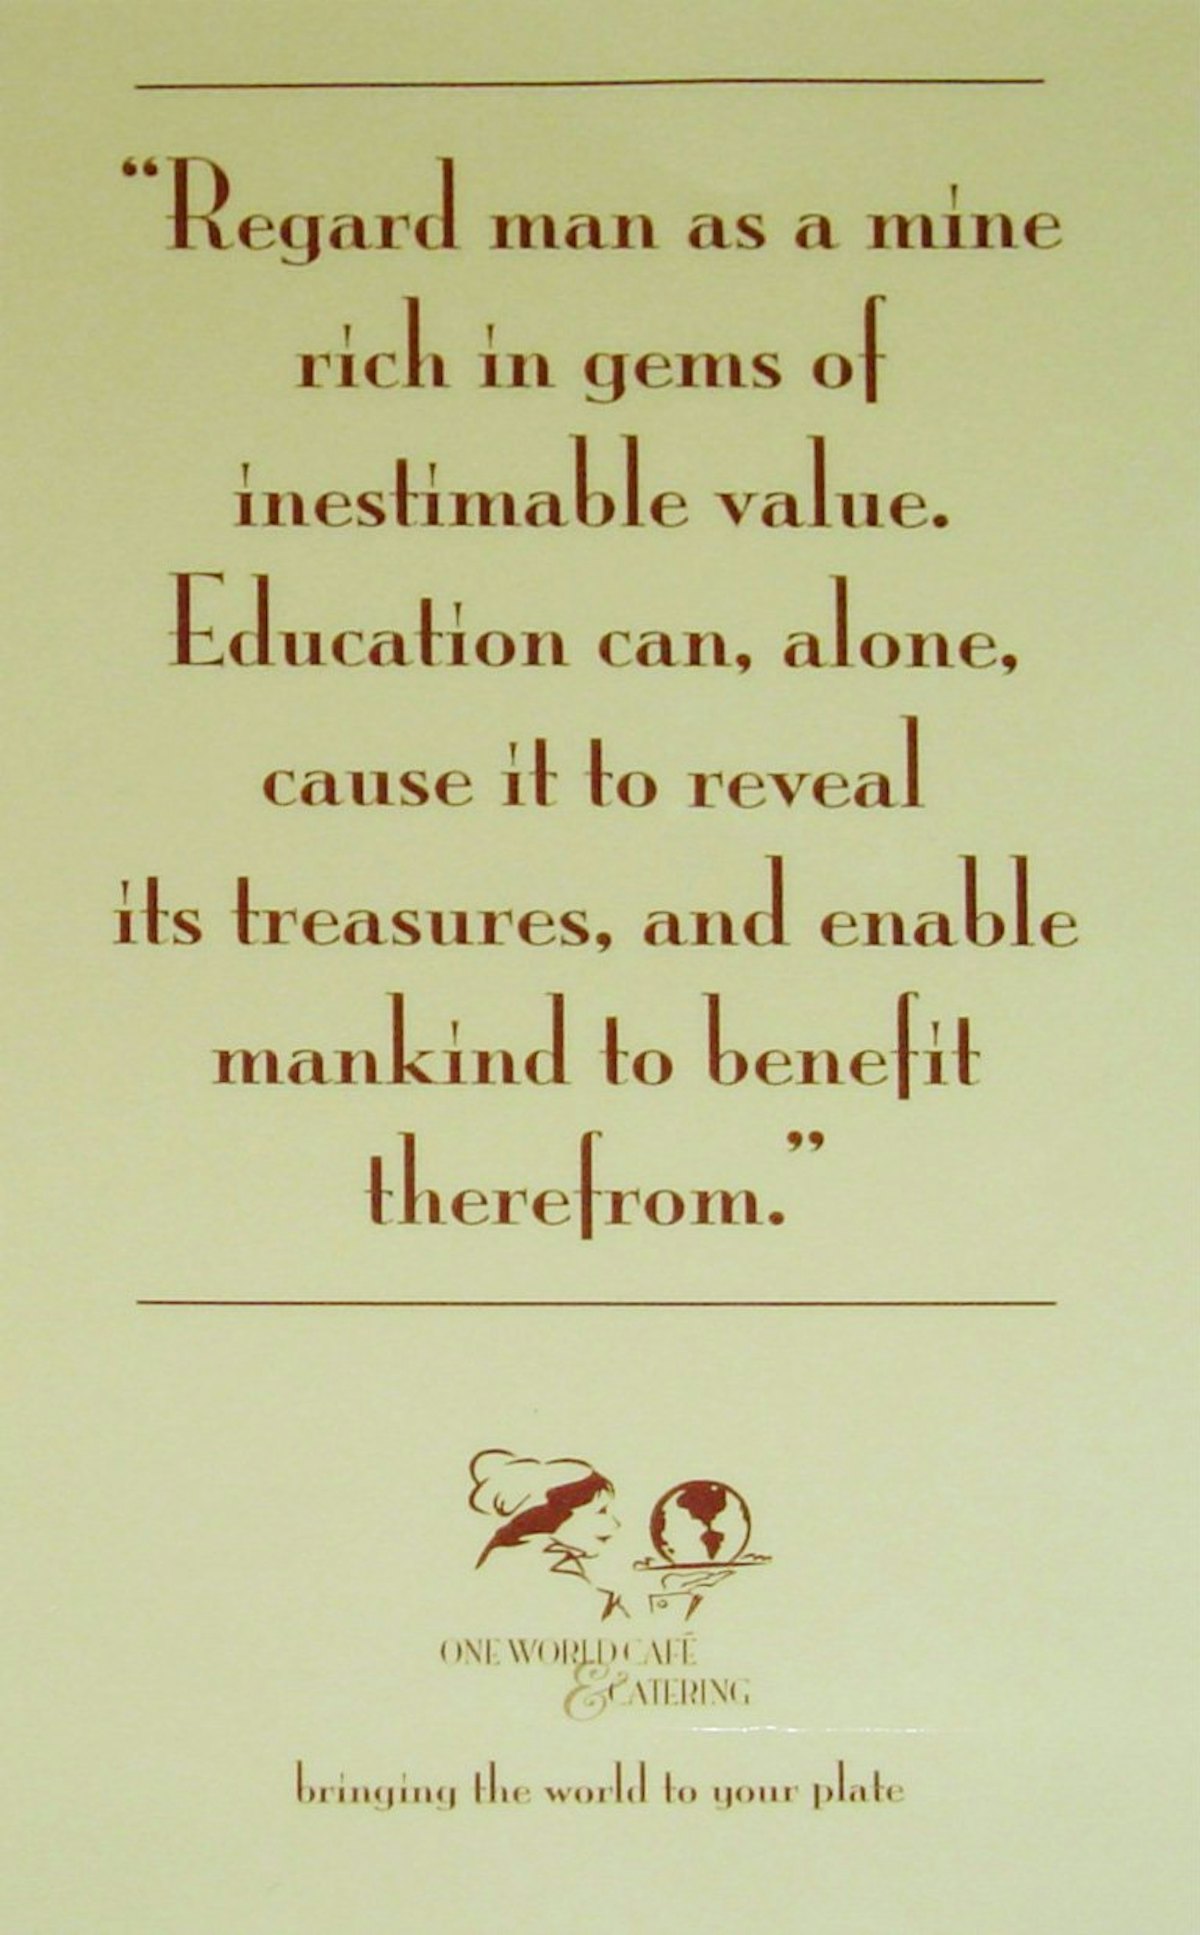 A quotation on one of the menu cards in the One World Cafe.